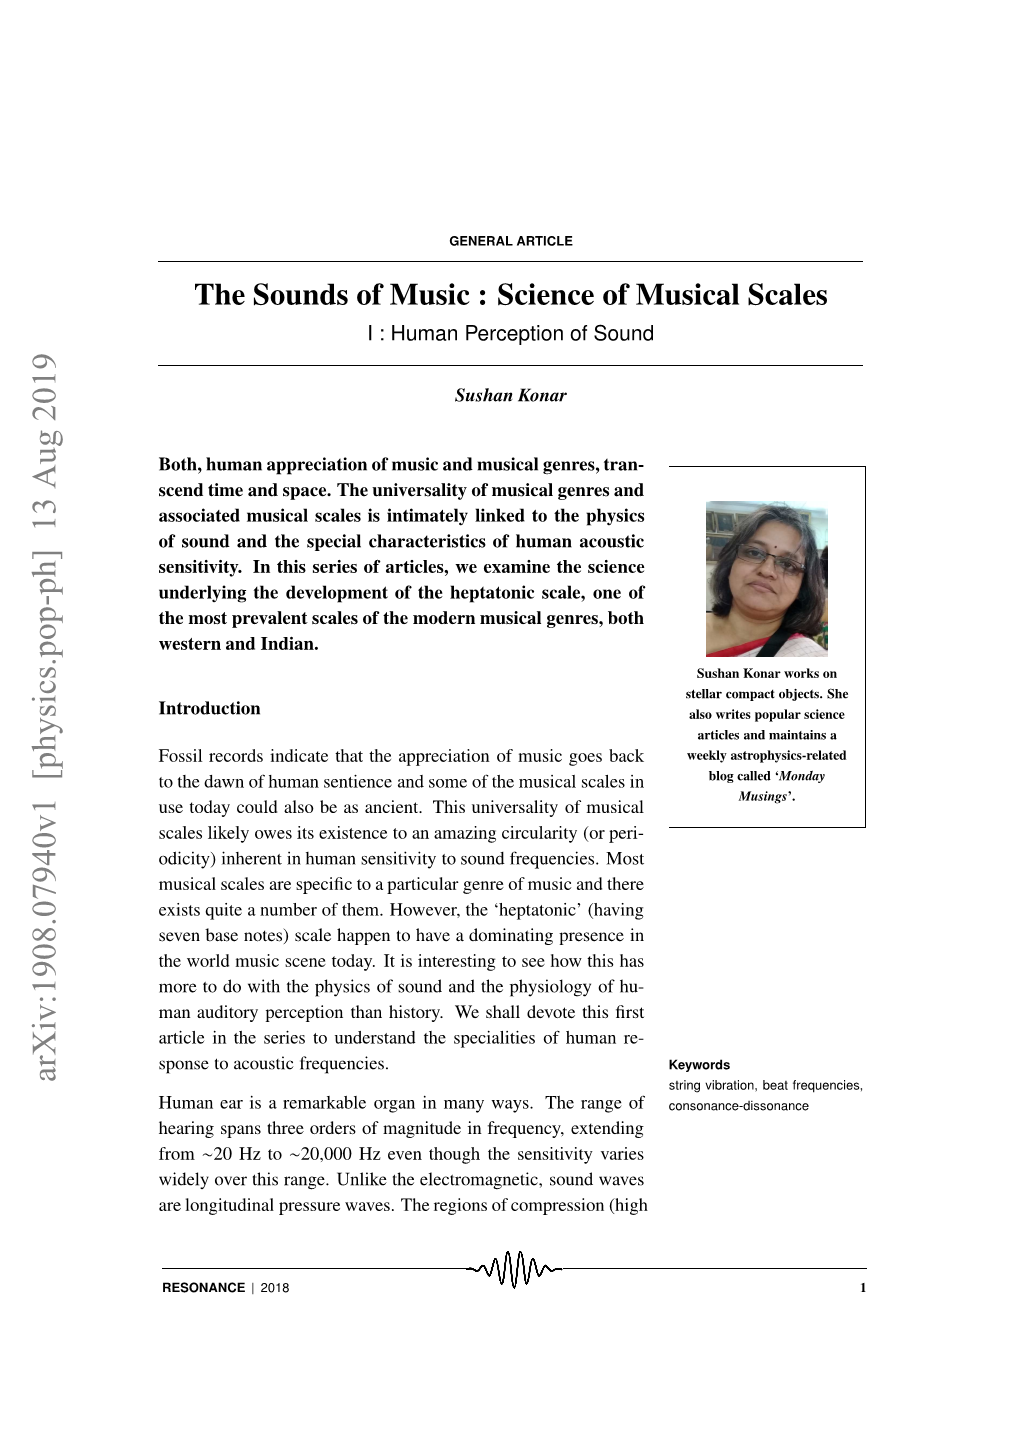 The Sounds of Music : Science of Musical Scales